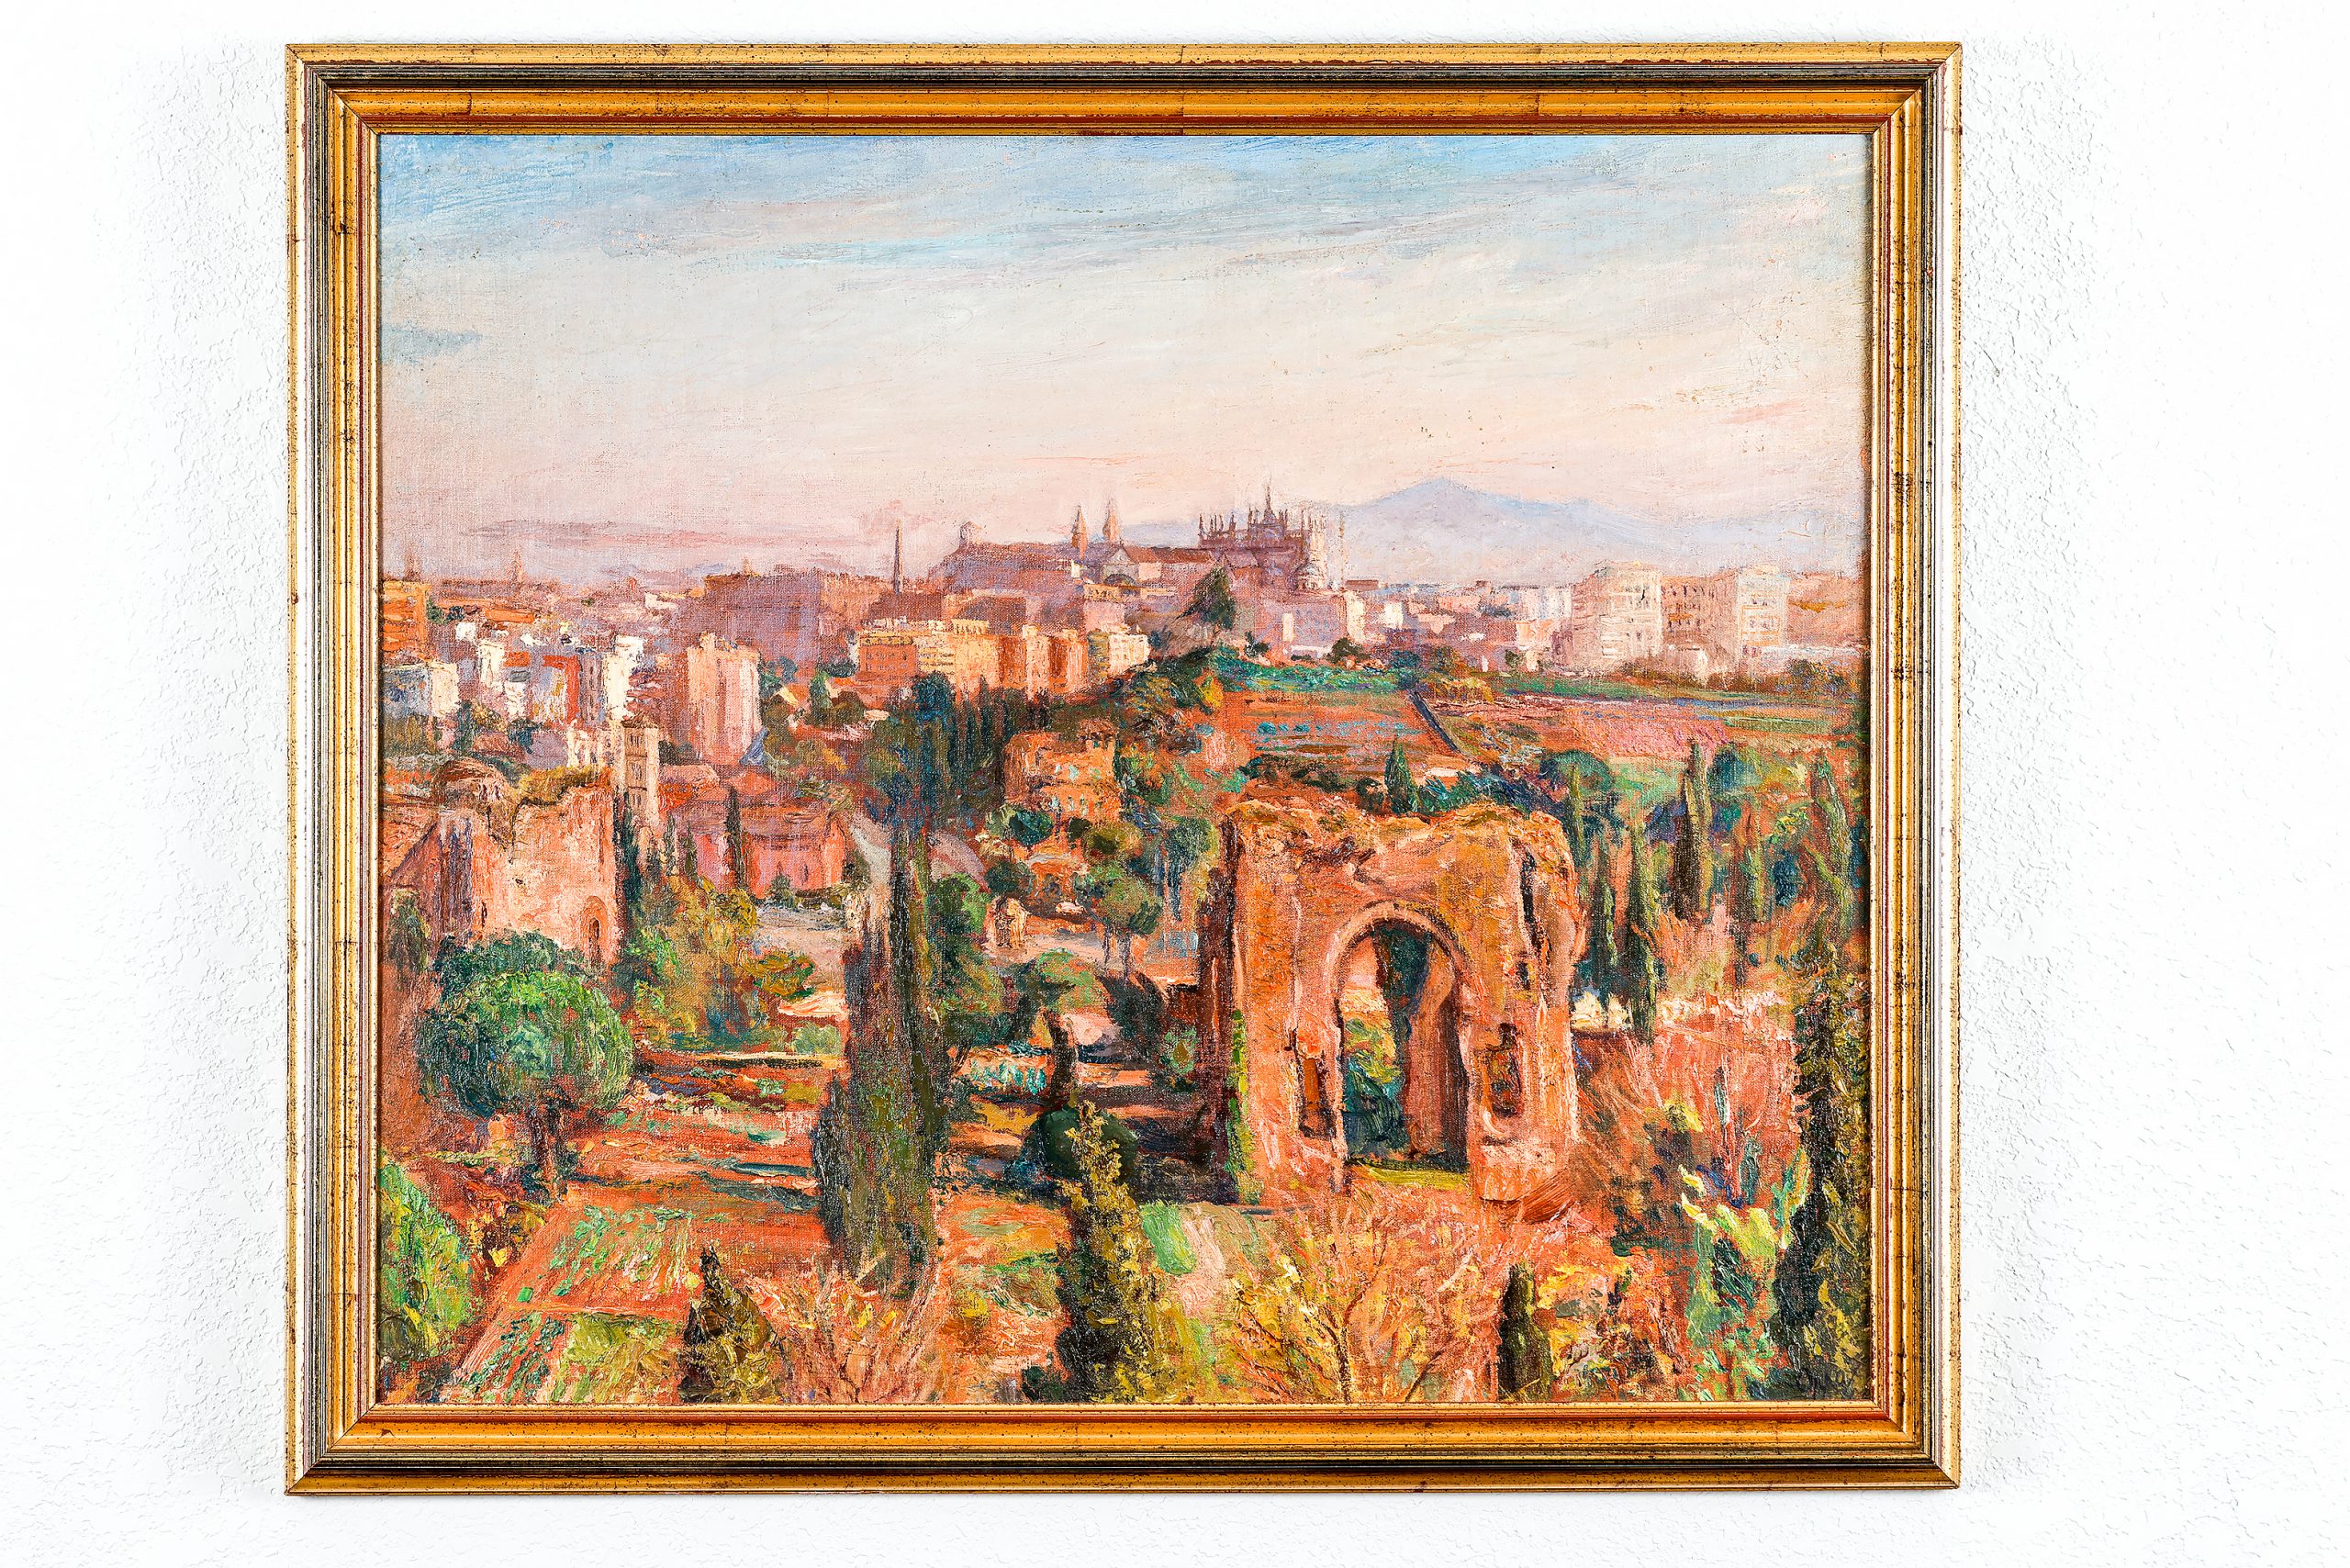 Eligio’s parents purchased this stunning oil painting by Cipriano Oppo, who was a very popular Italian artist, when they were first married. It represents the old imperial Roman market, called the “Forum.” 